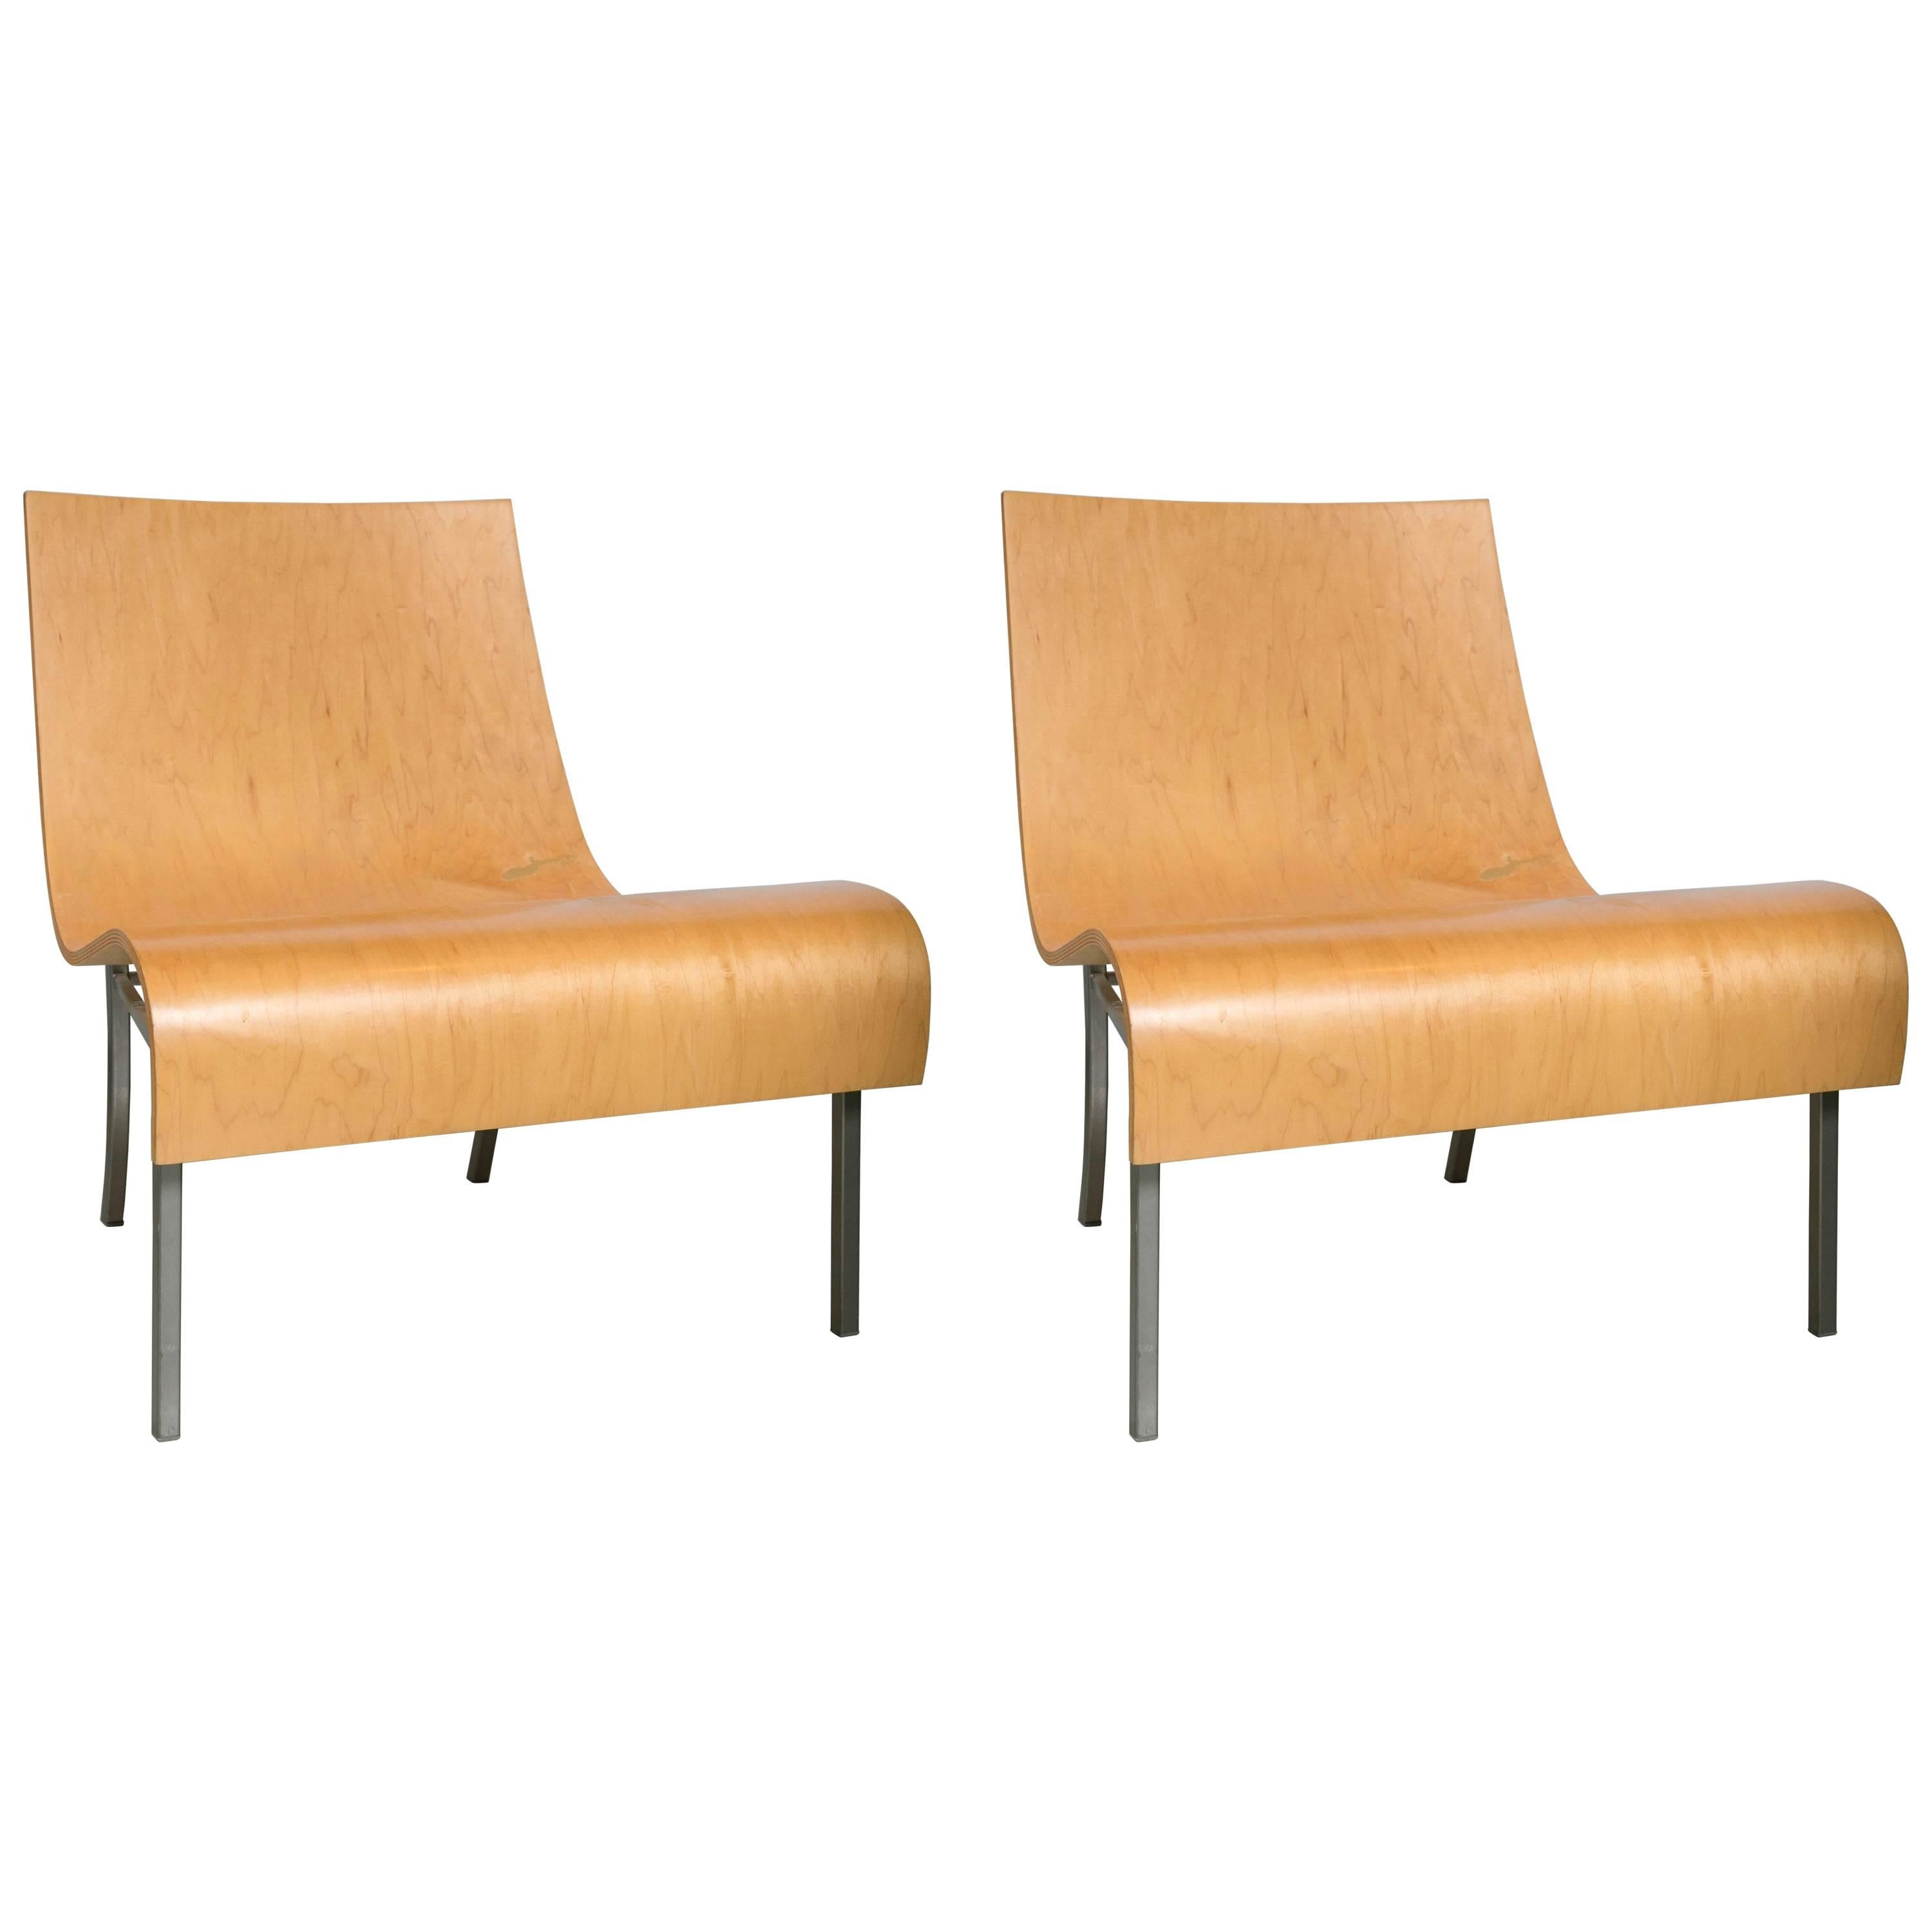 Pair of Molded Wood Chairs